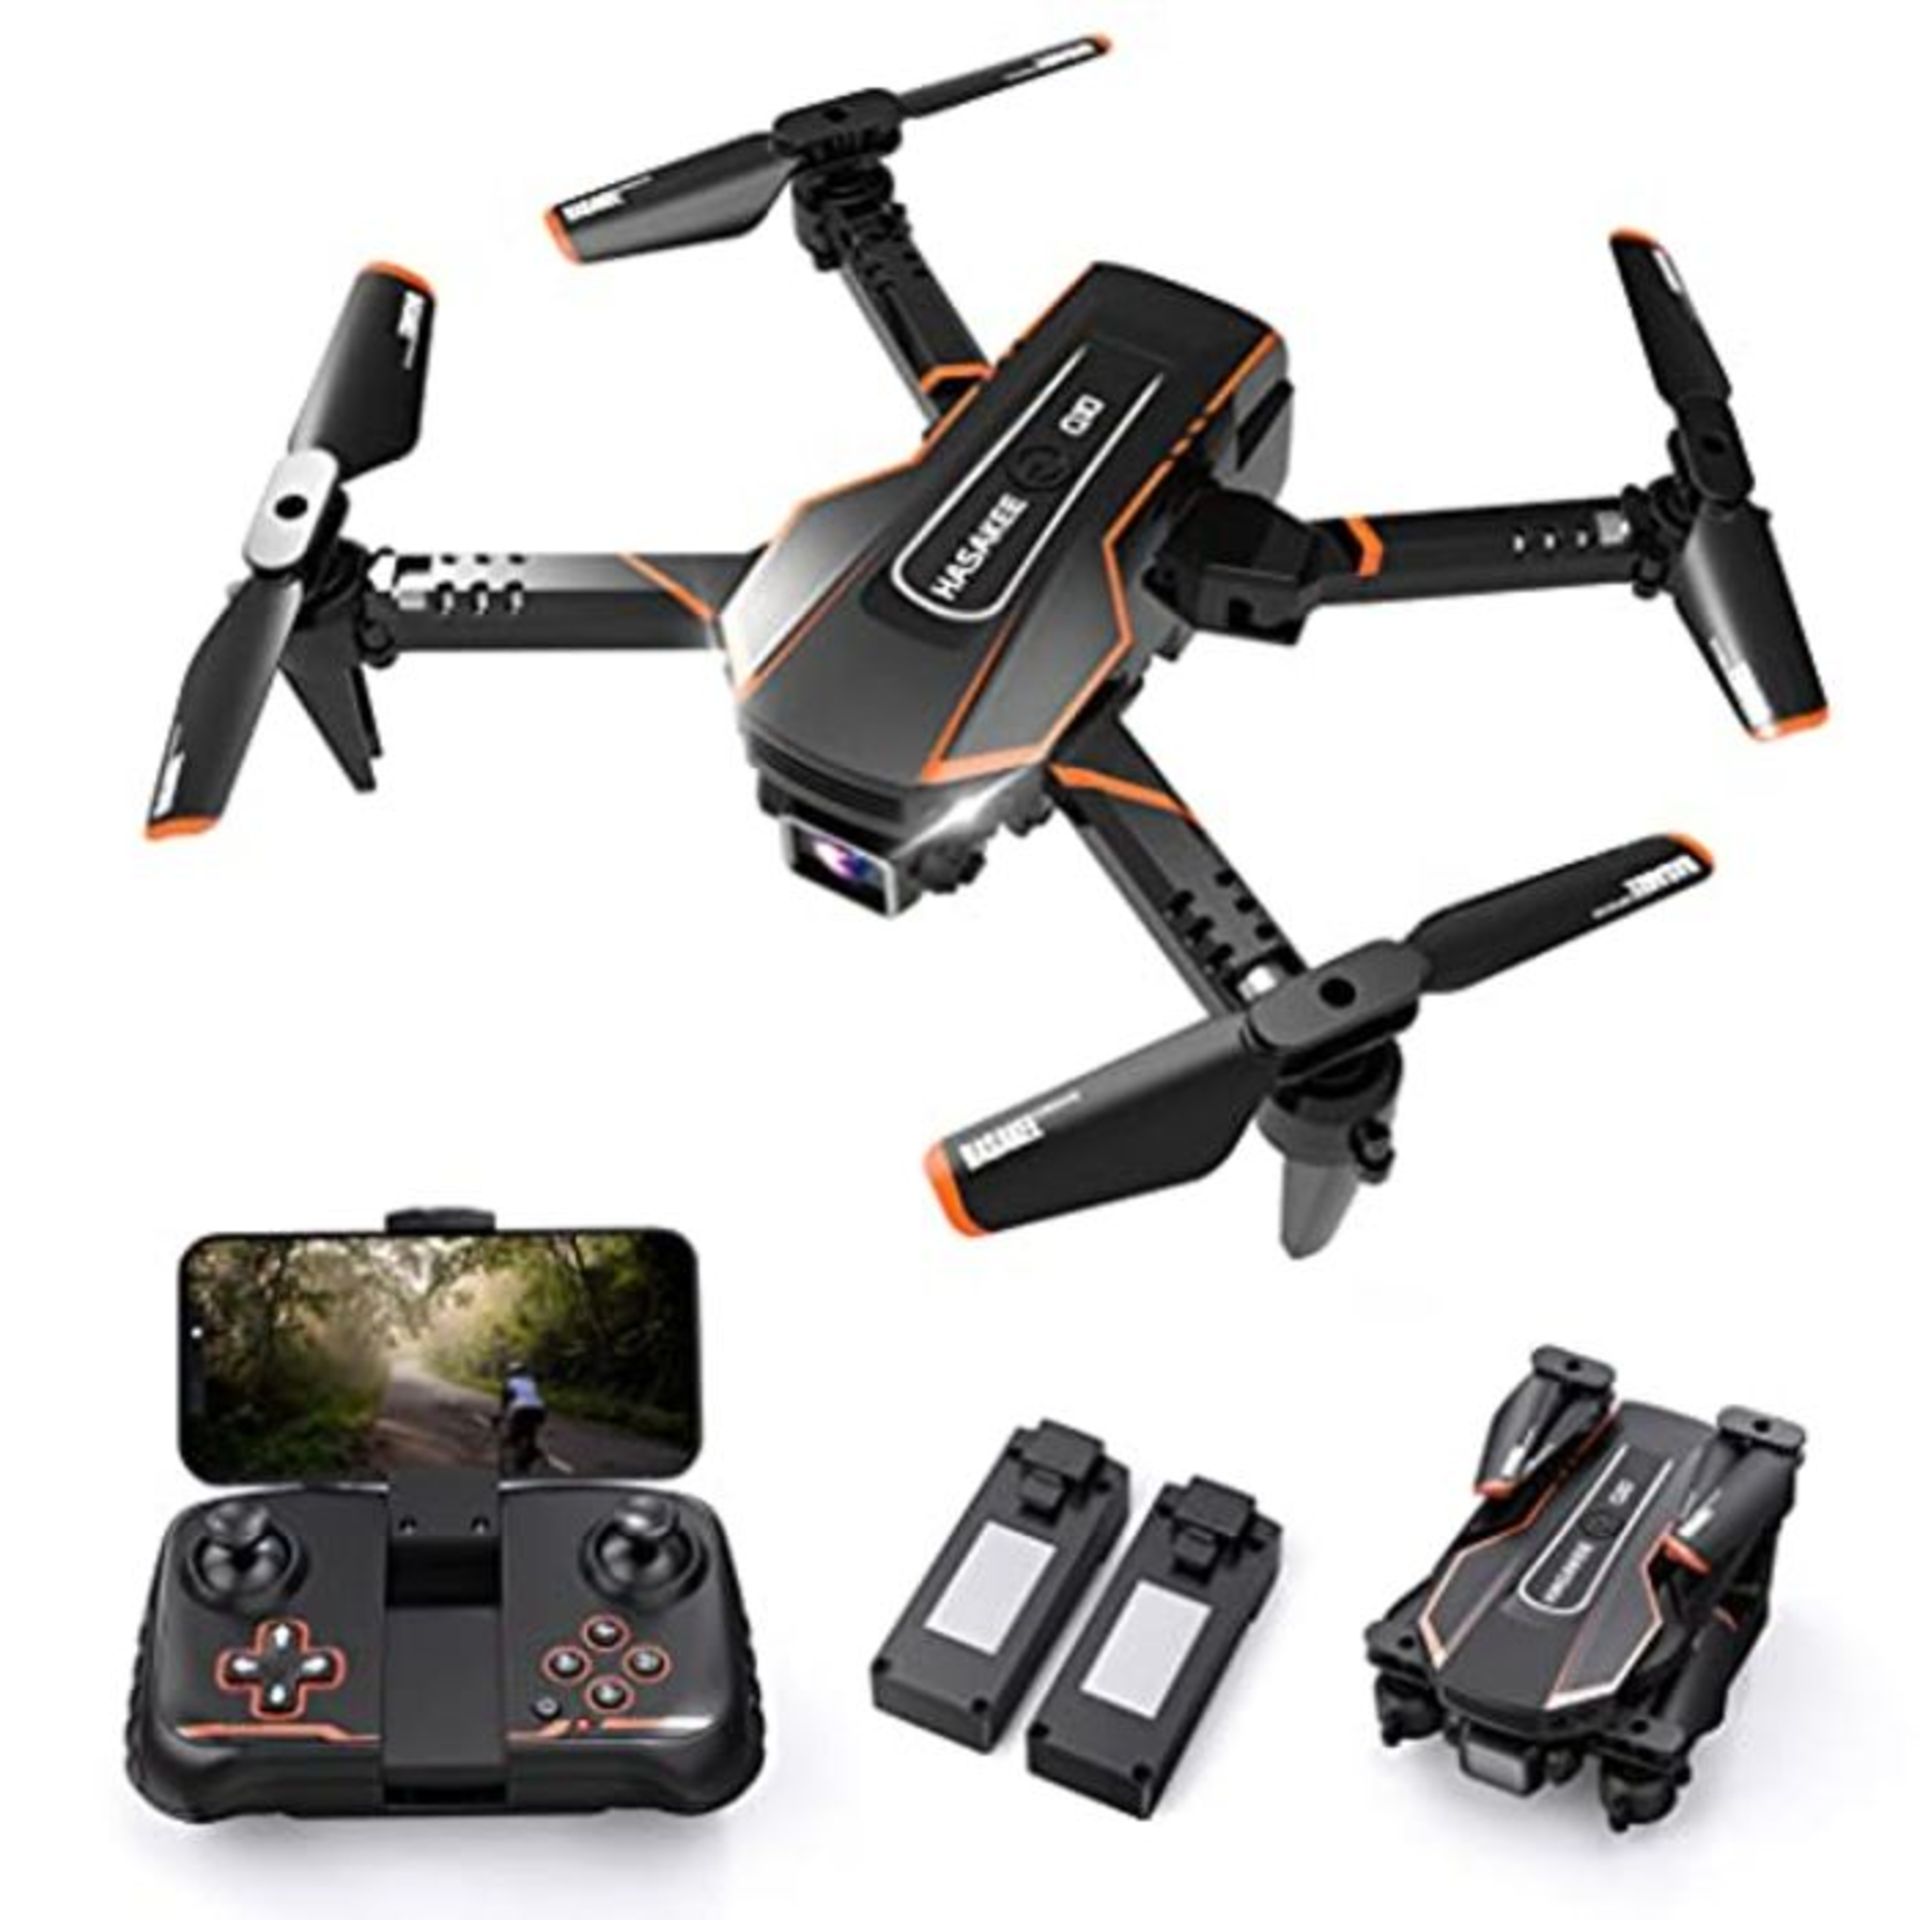 Q10 Mini Drone for Kids with Camera 720P HD FPV, Foldable Quarcopter with Gravity Sens